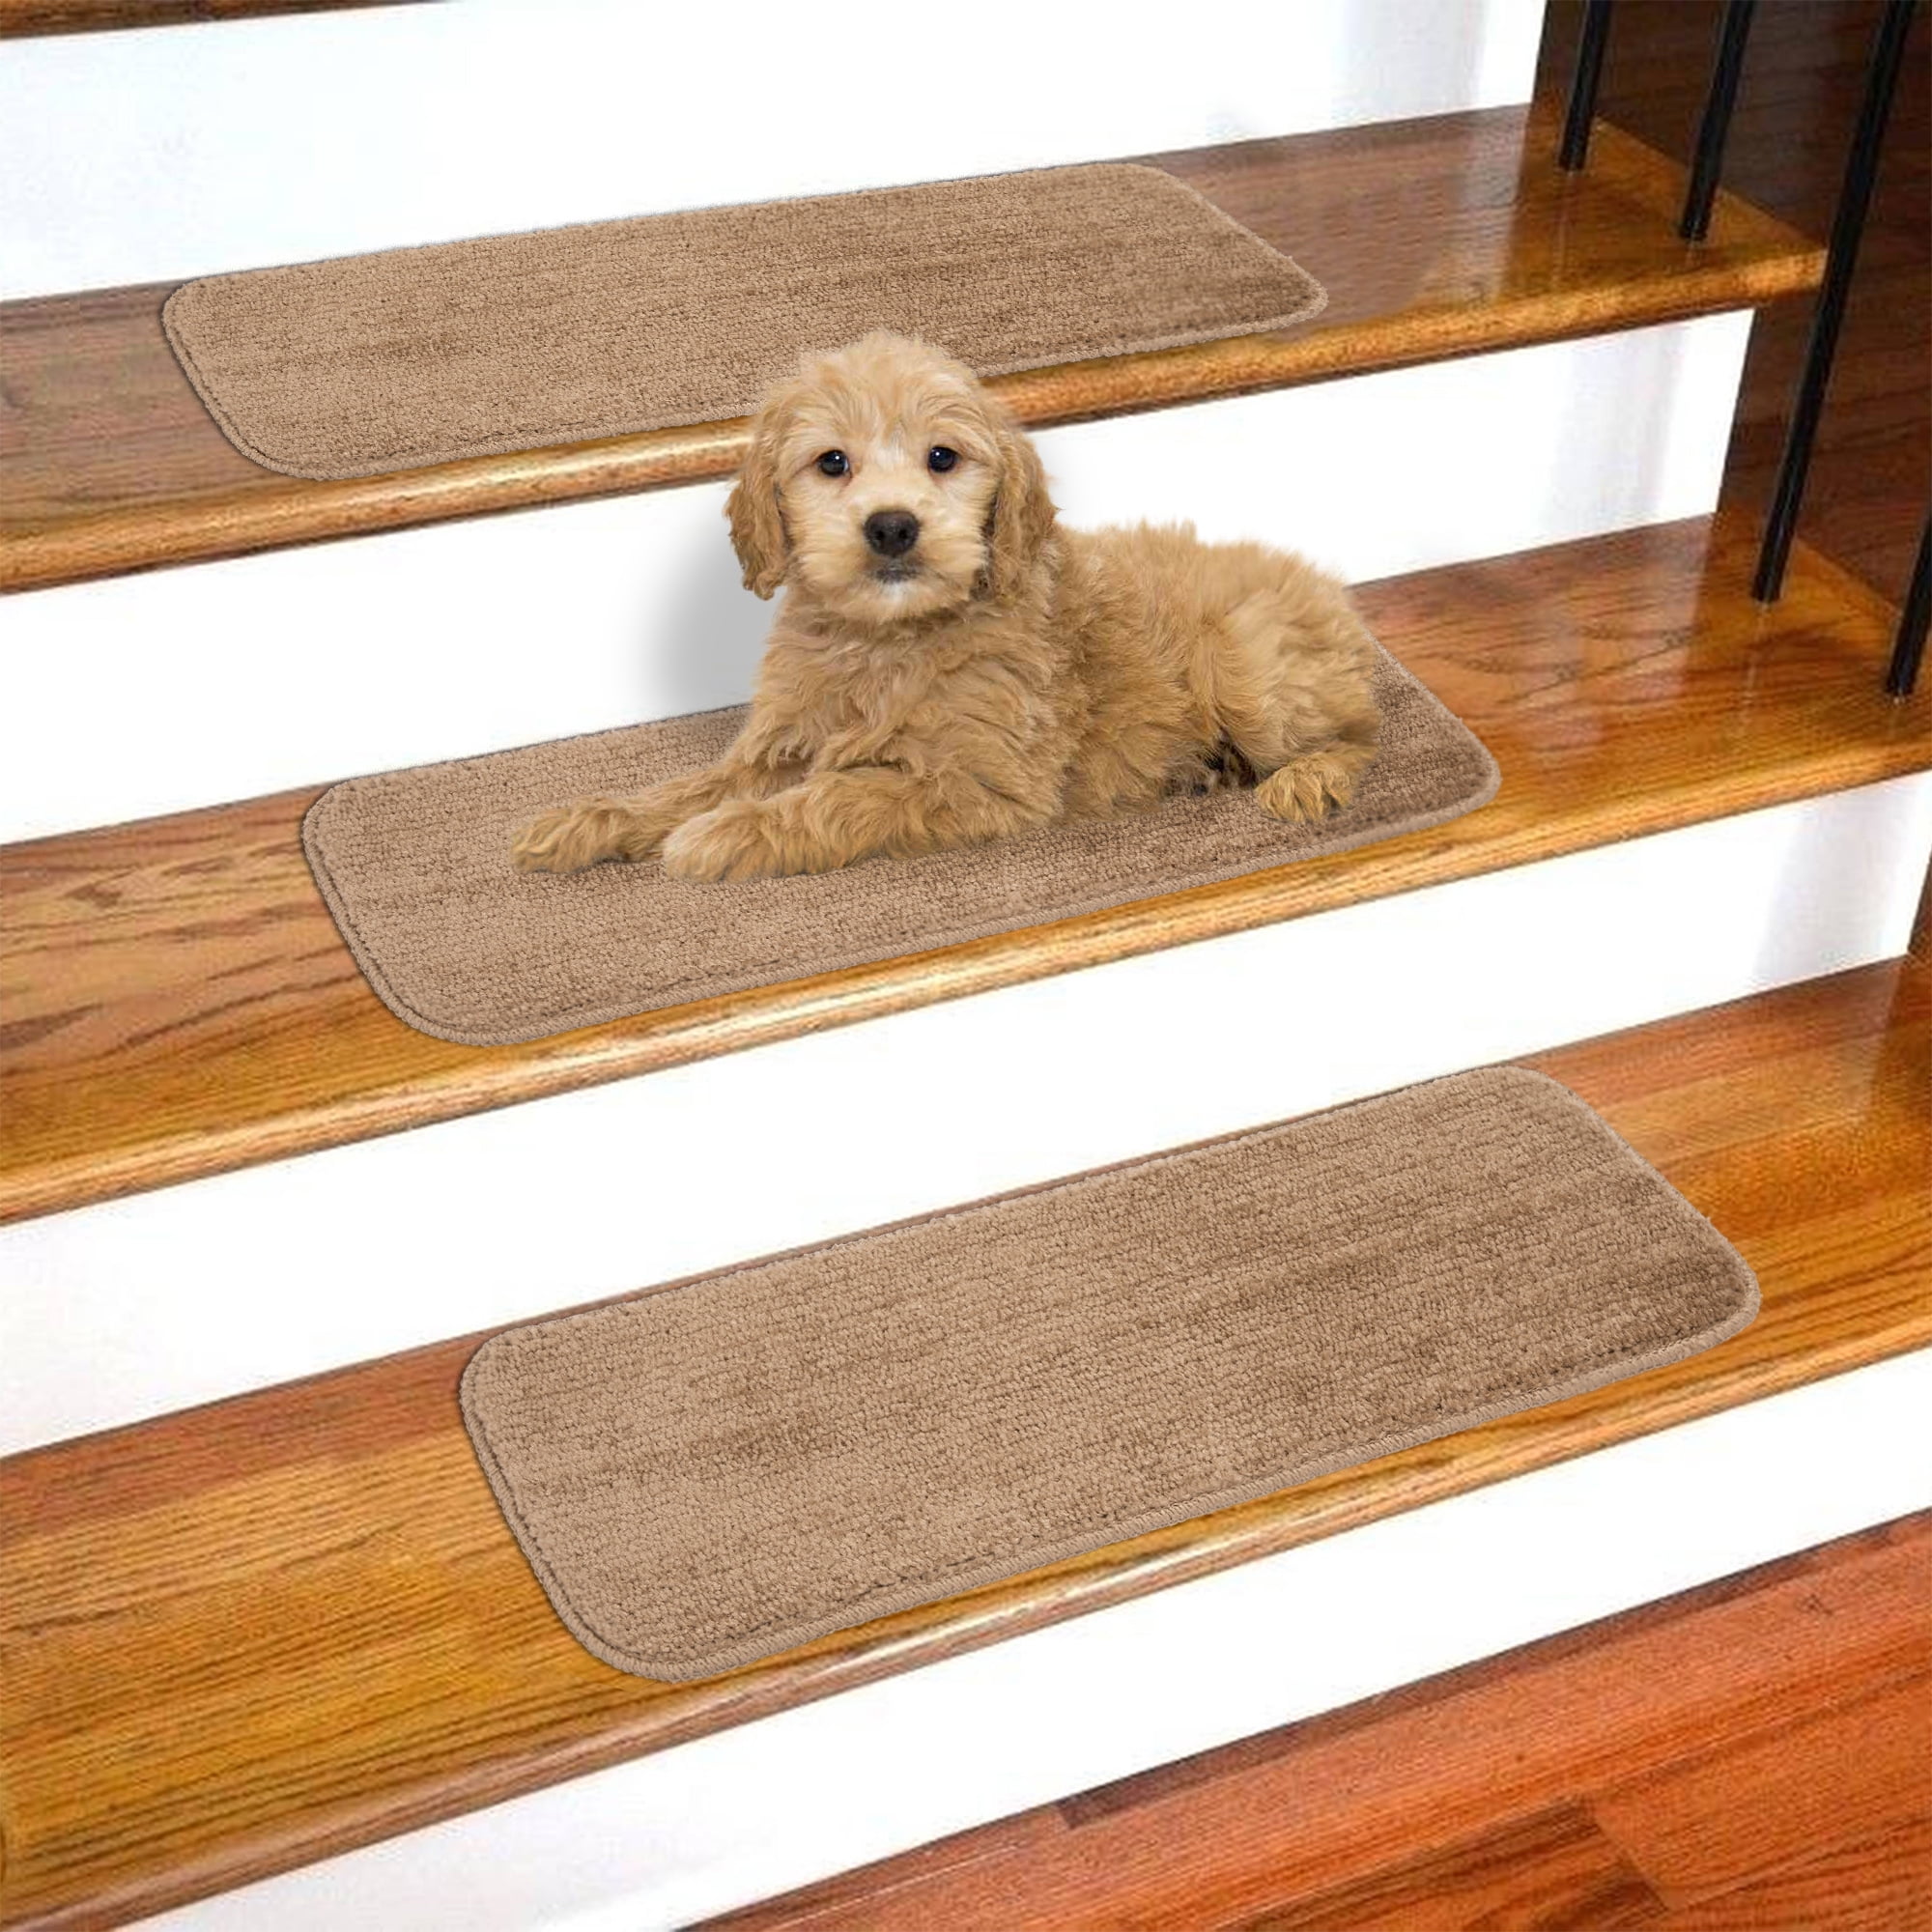 Shape28 Ultra-Thin Microfiber Stair Carpet with Slip-Resistant Rubber Backing to Reduce Slipping Risk Quick and Easy to Install- Premium Quality 35”x23”, Gray, 1 pc. Designer Indoor Floor Mats